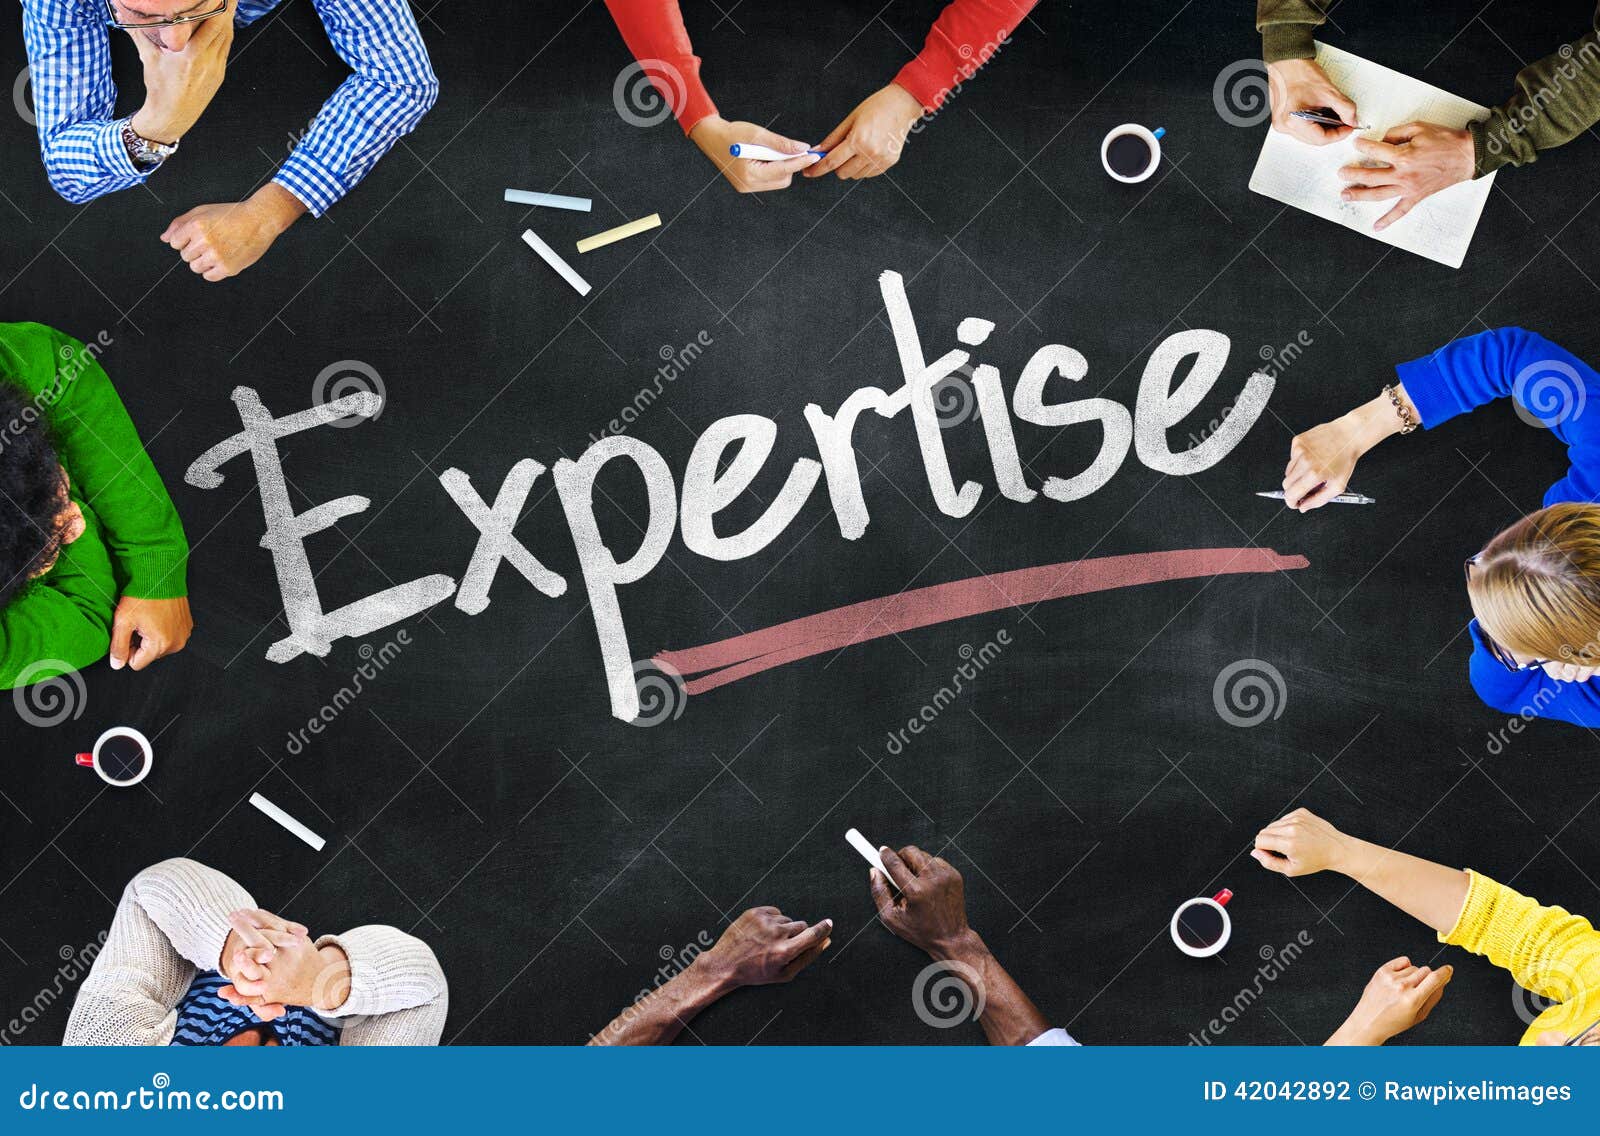 people working and expertise concept